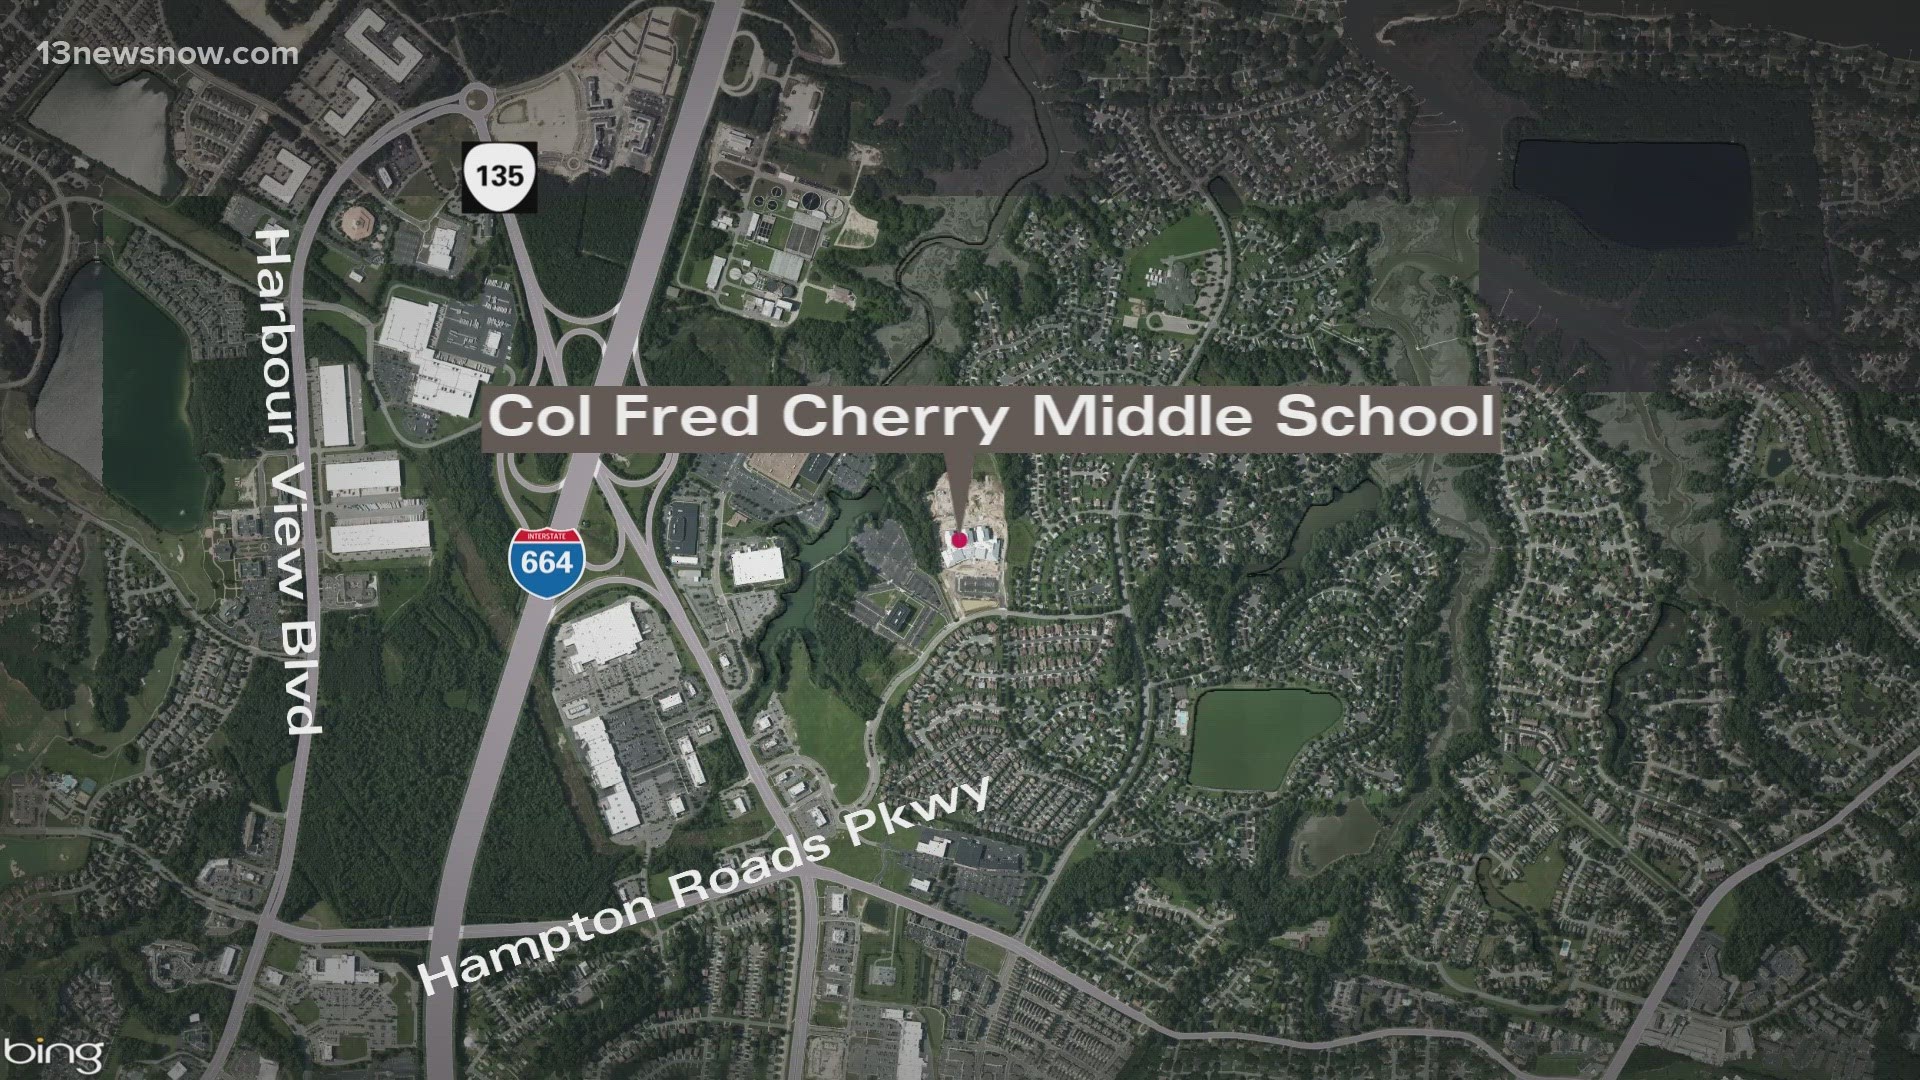 According to city officials, Col. Fred Cherry Middle School has been evacuated as a precautionary measure as law enforcement sweeps the building.